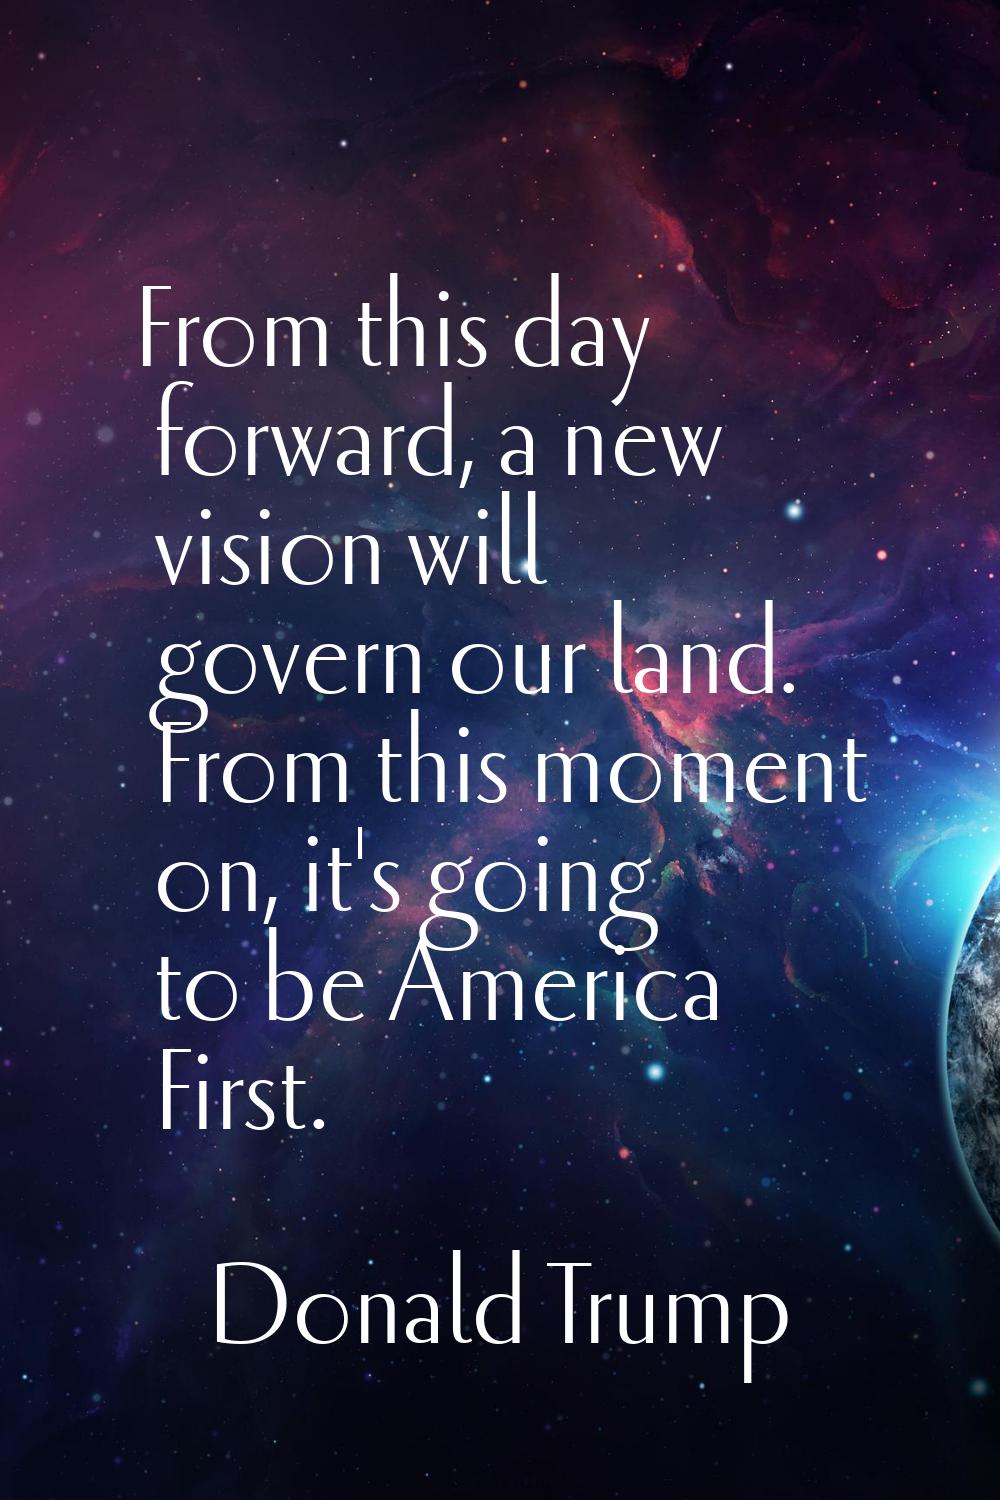 From this day forward, a new vision will govern our land. From this moment on, it's going to be Ame